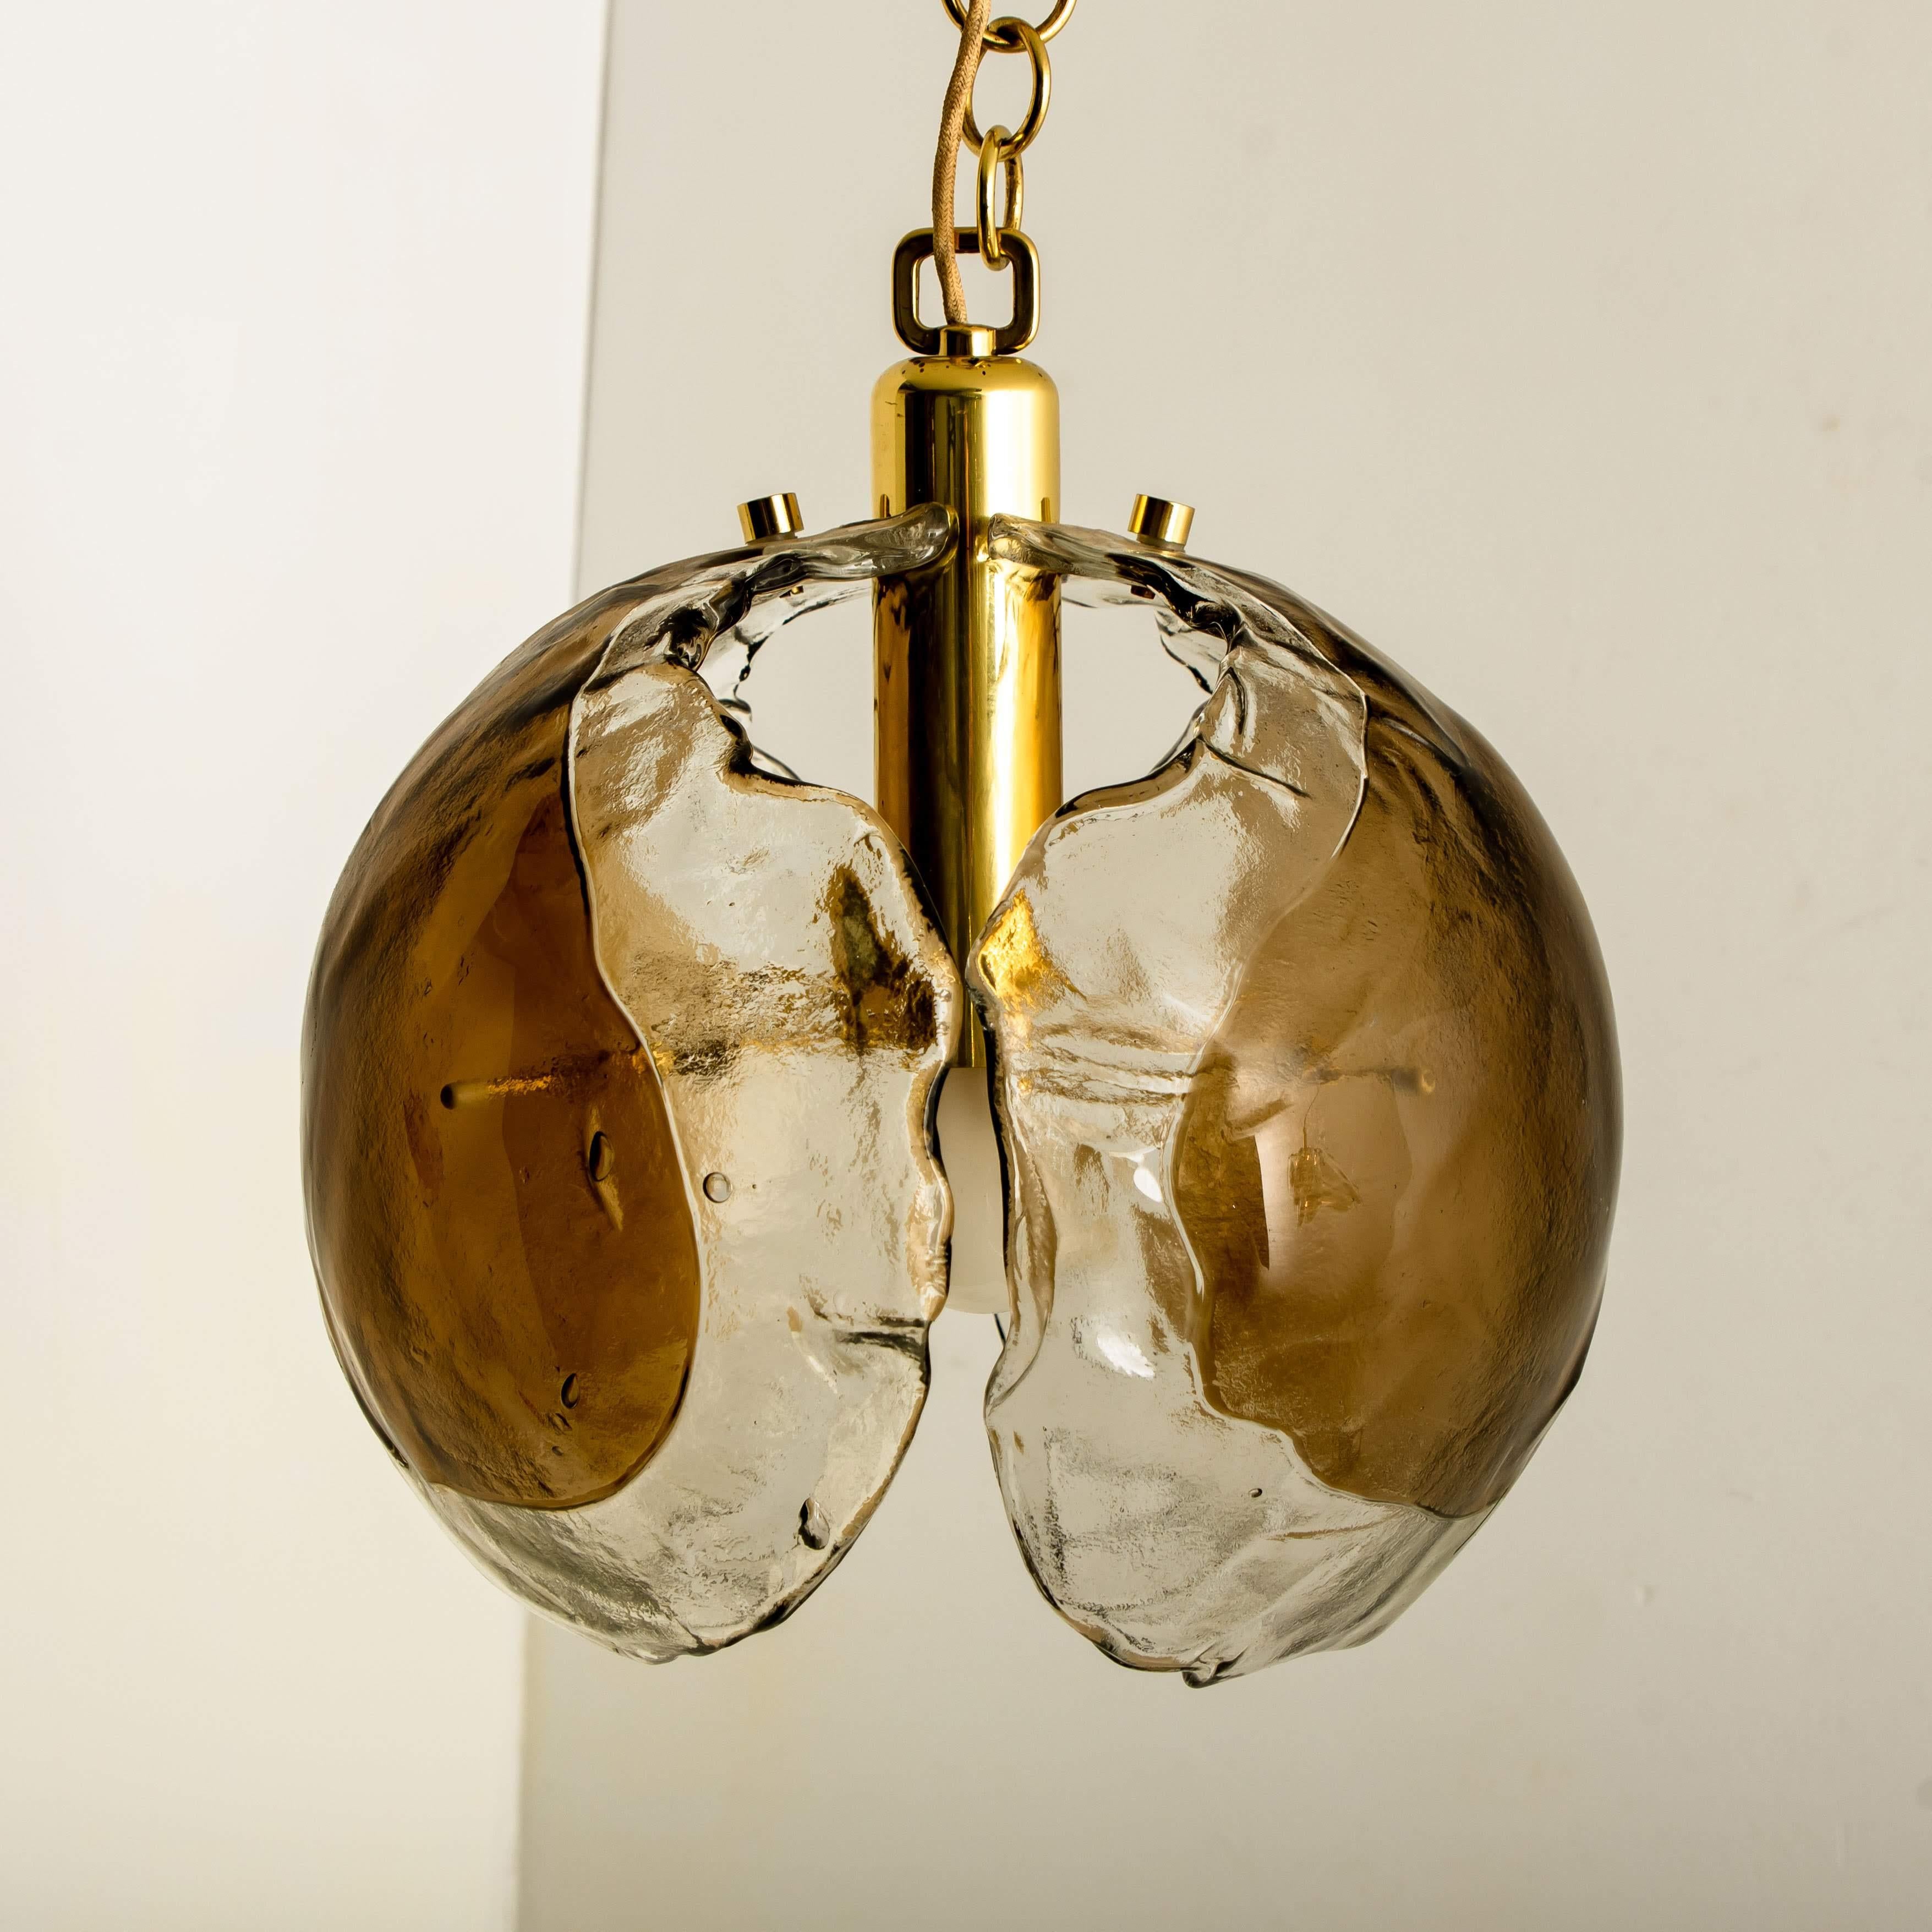 1 of the 3 Kalmar Chandelier Pendant Lights, Smoked Glass and Brass, 1970s For Sale 5